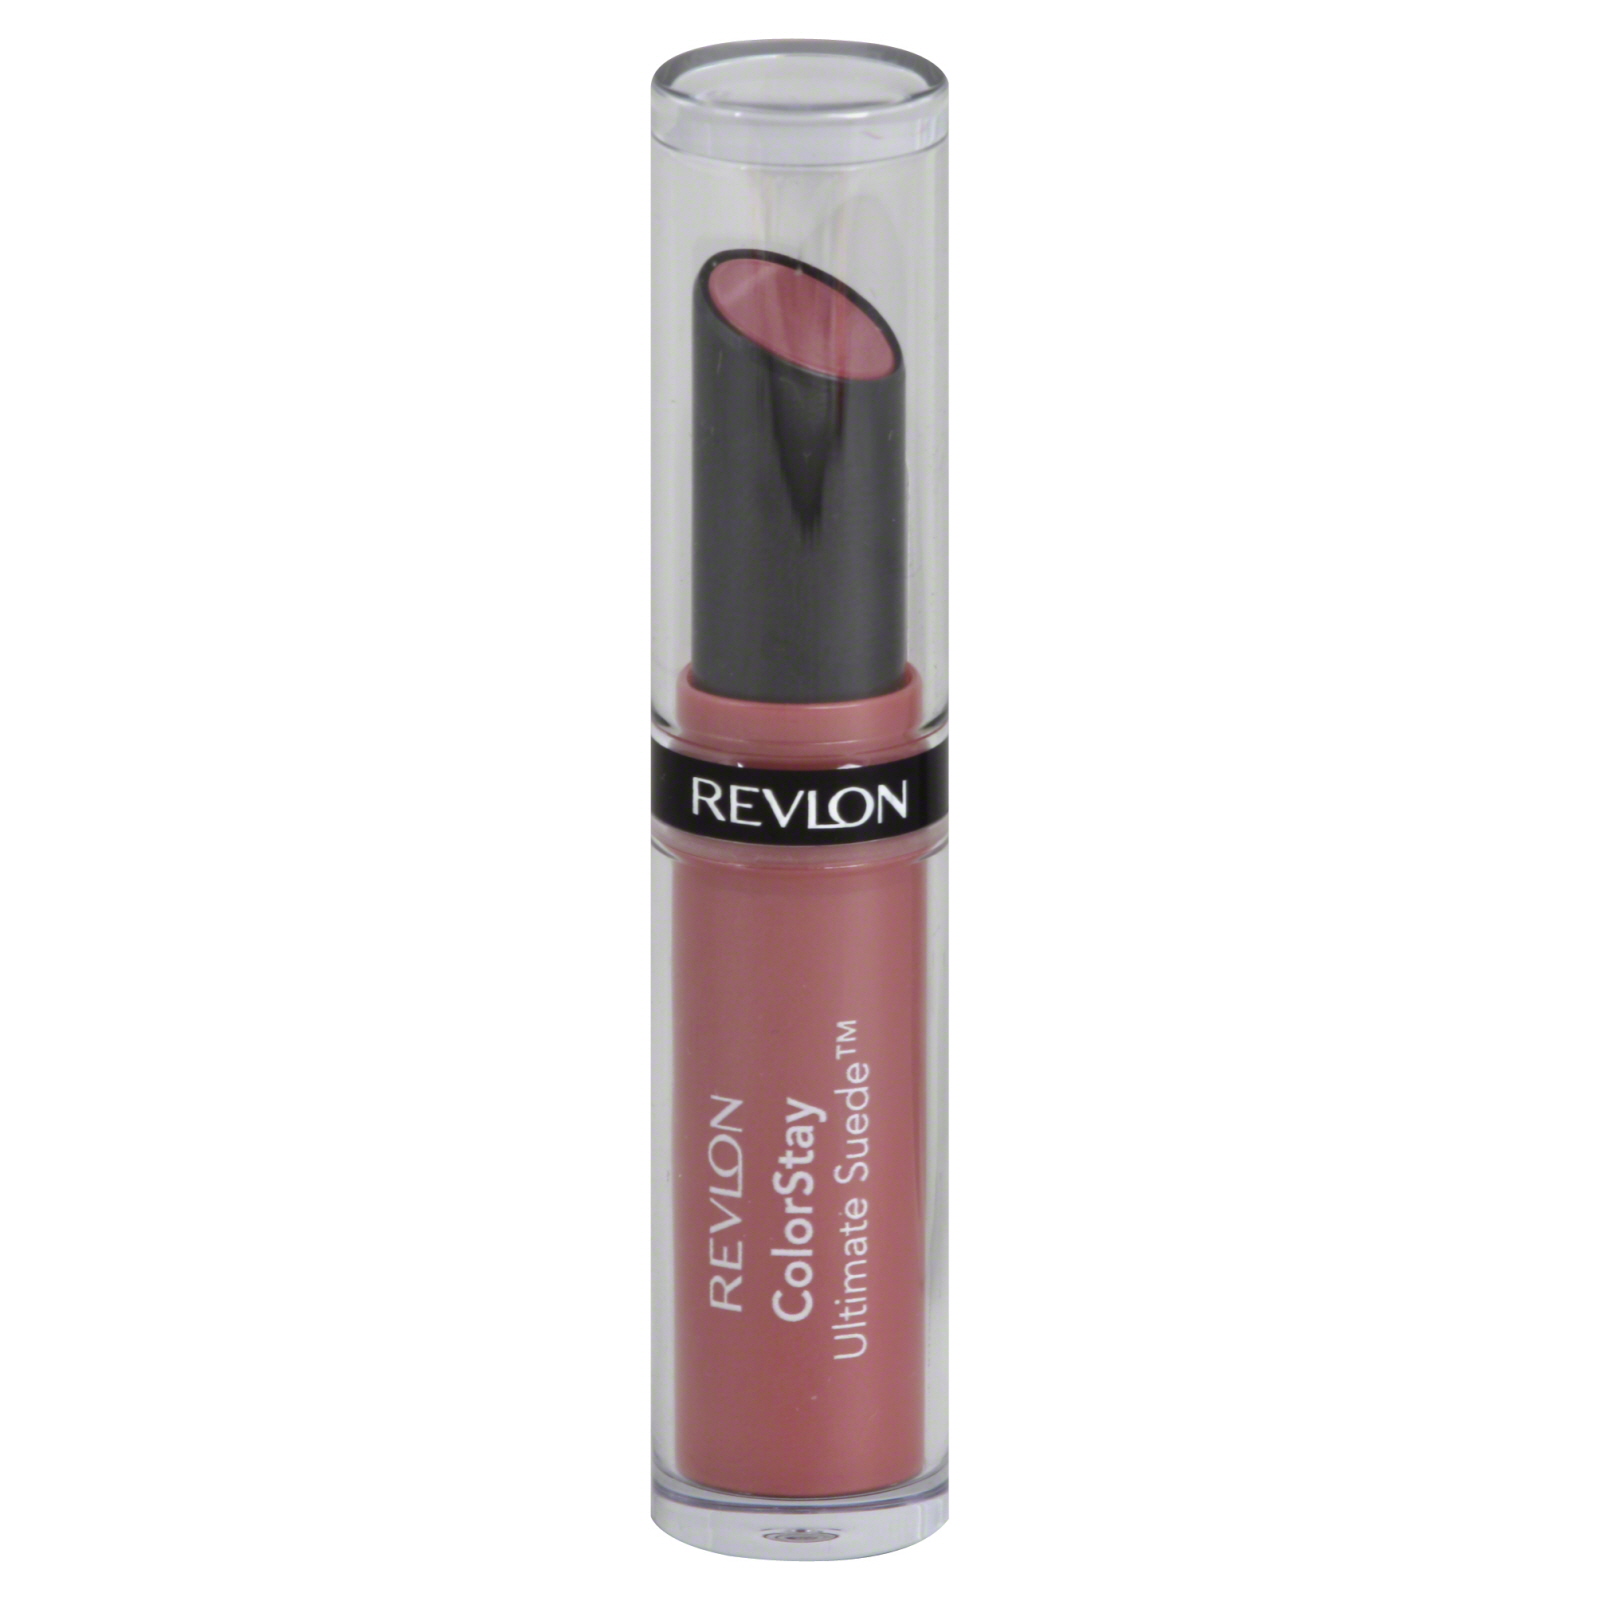 ColorStay Ultimate Suede Lipstick, Preview 070, 0.09 oz (255 g)